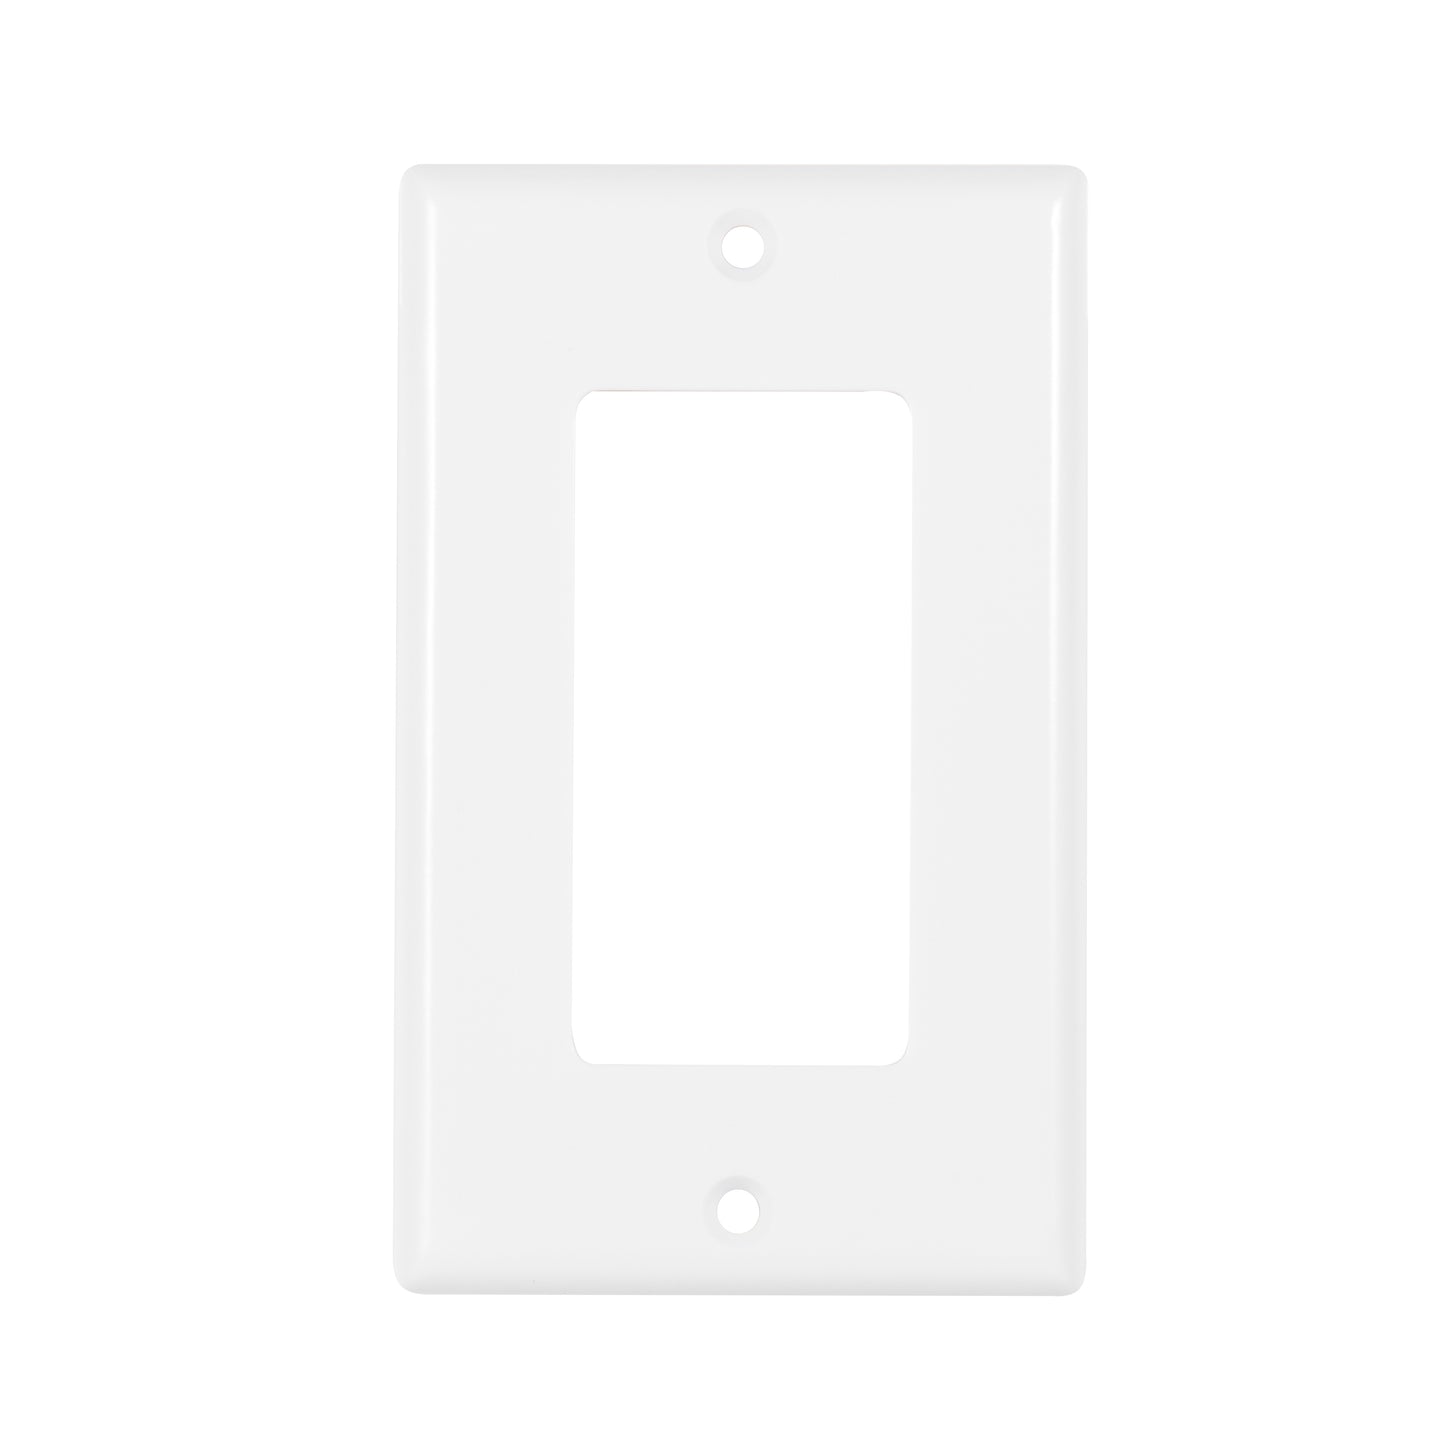 1-Gang Decorator Wall Plate, White (10-Pack)